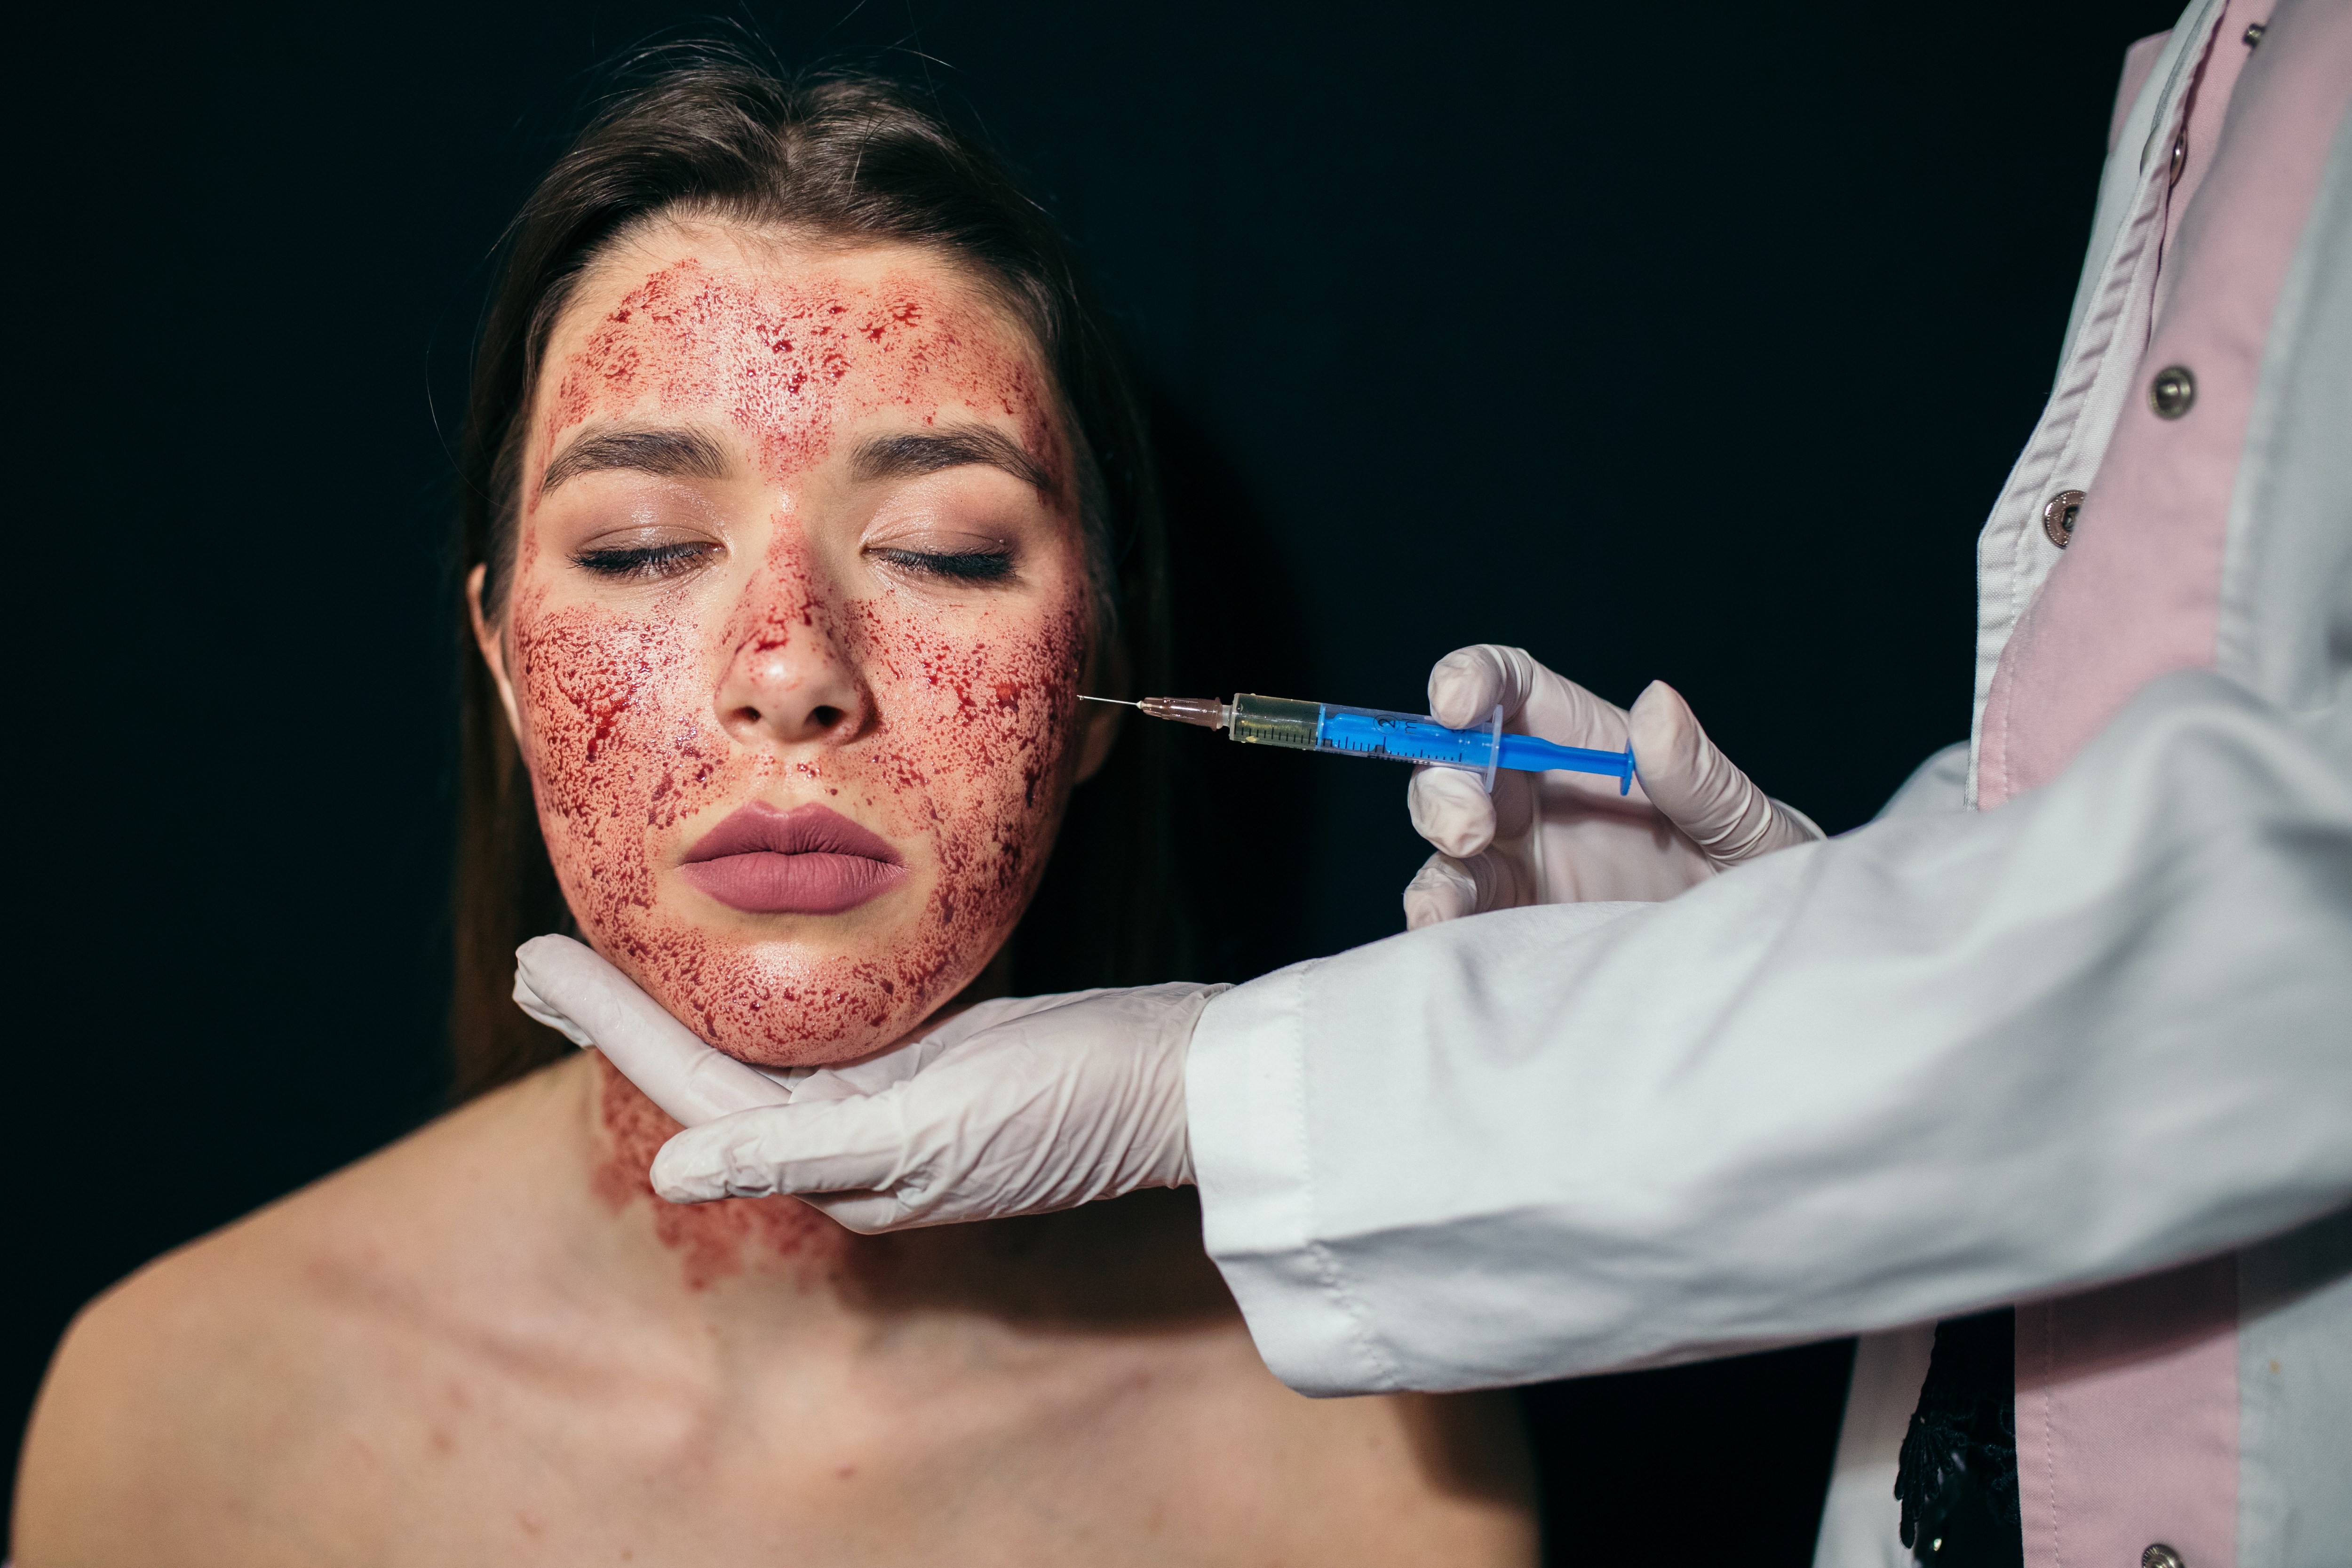 Three women infected with HIV after having ‘vampire facials’